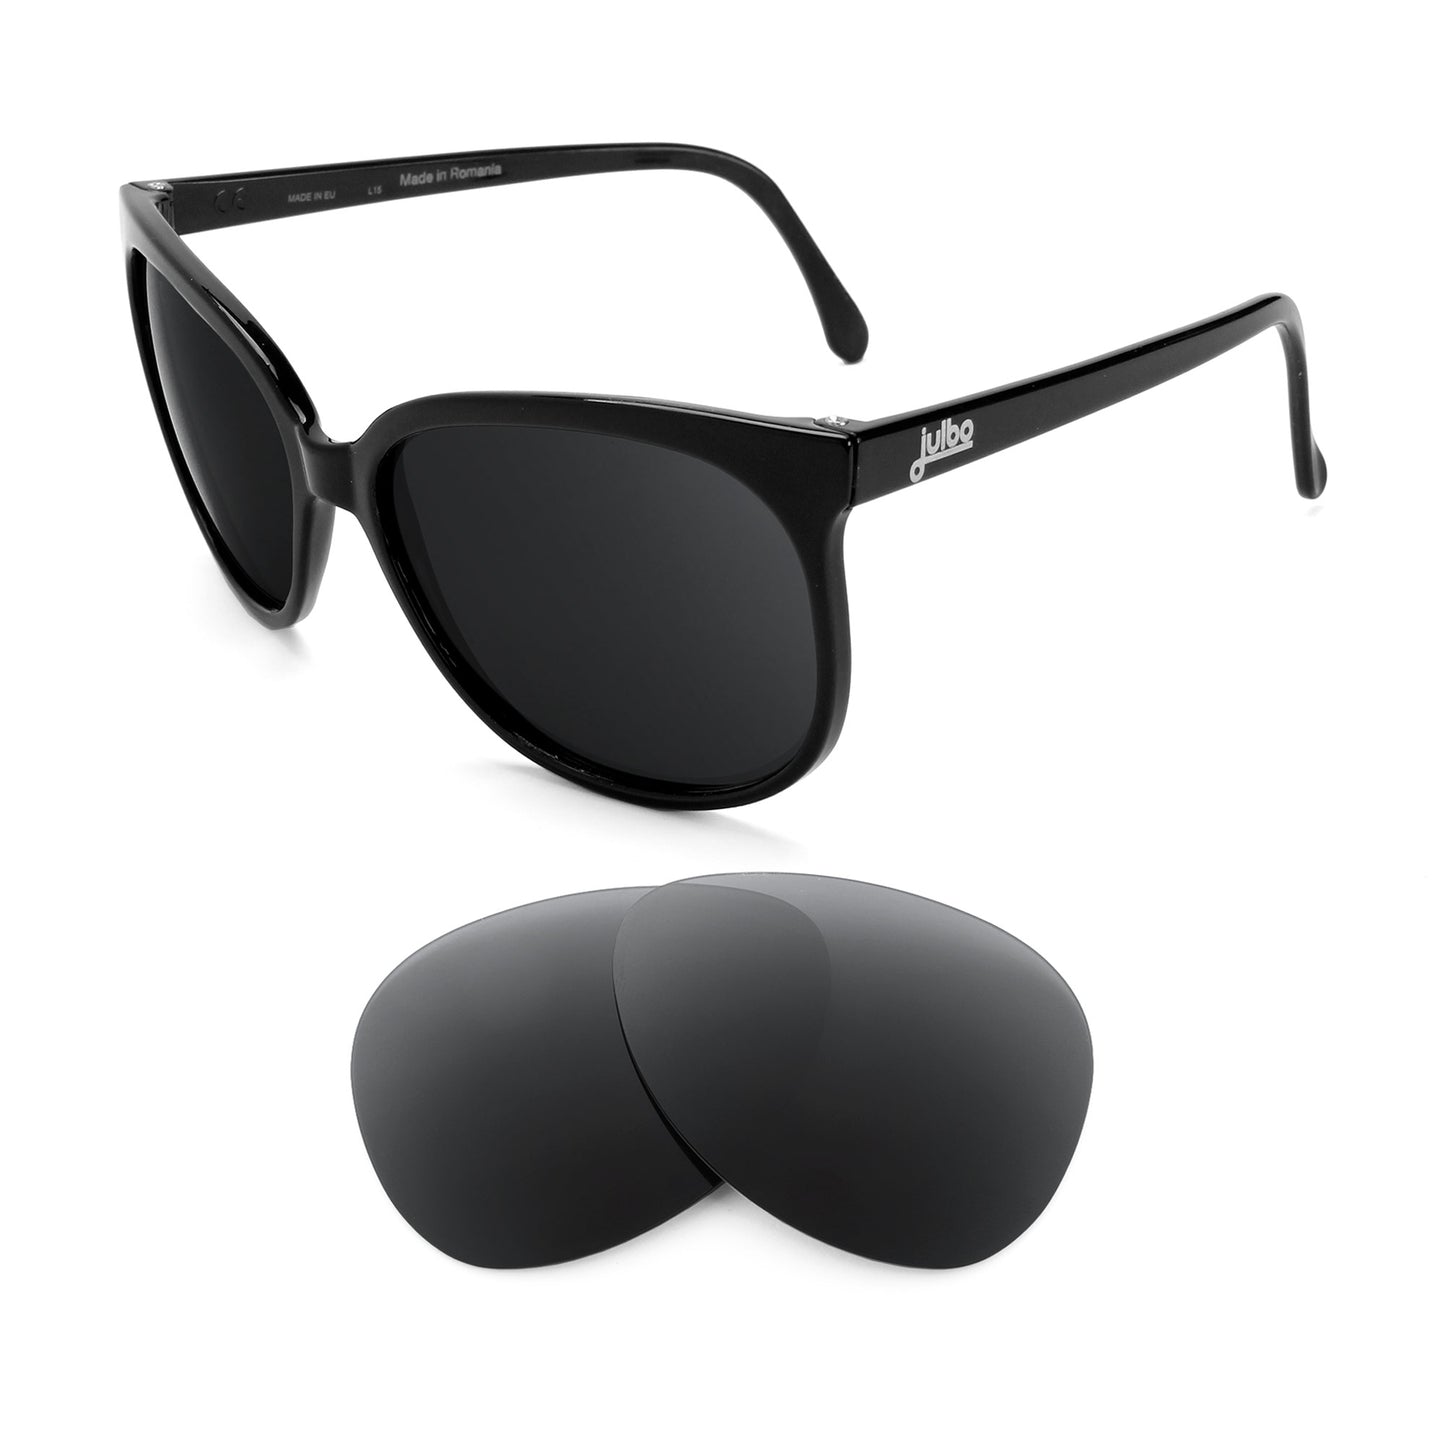 Julbo Megeve sunglasses with replacement lenses